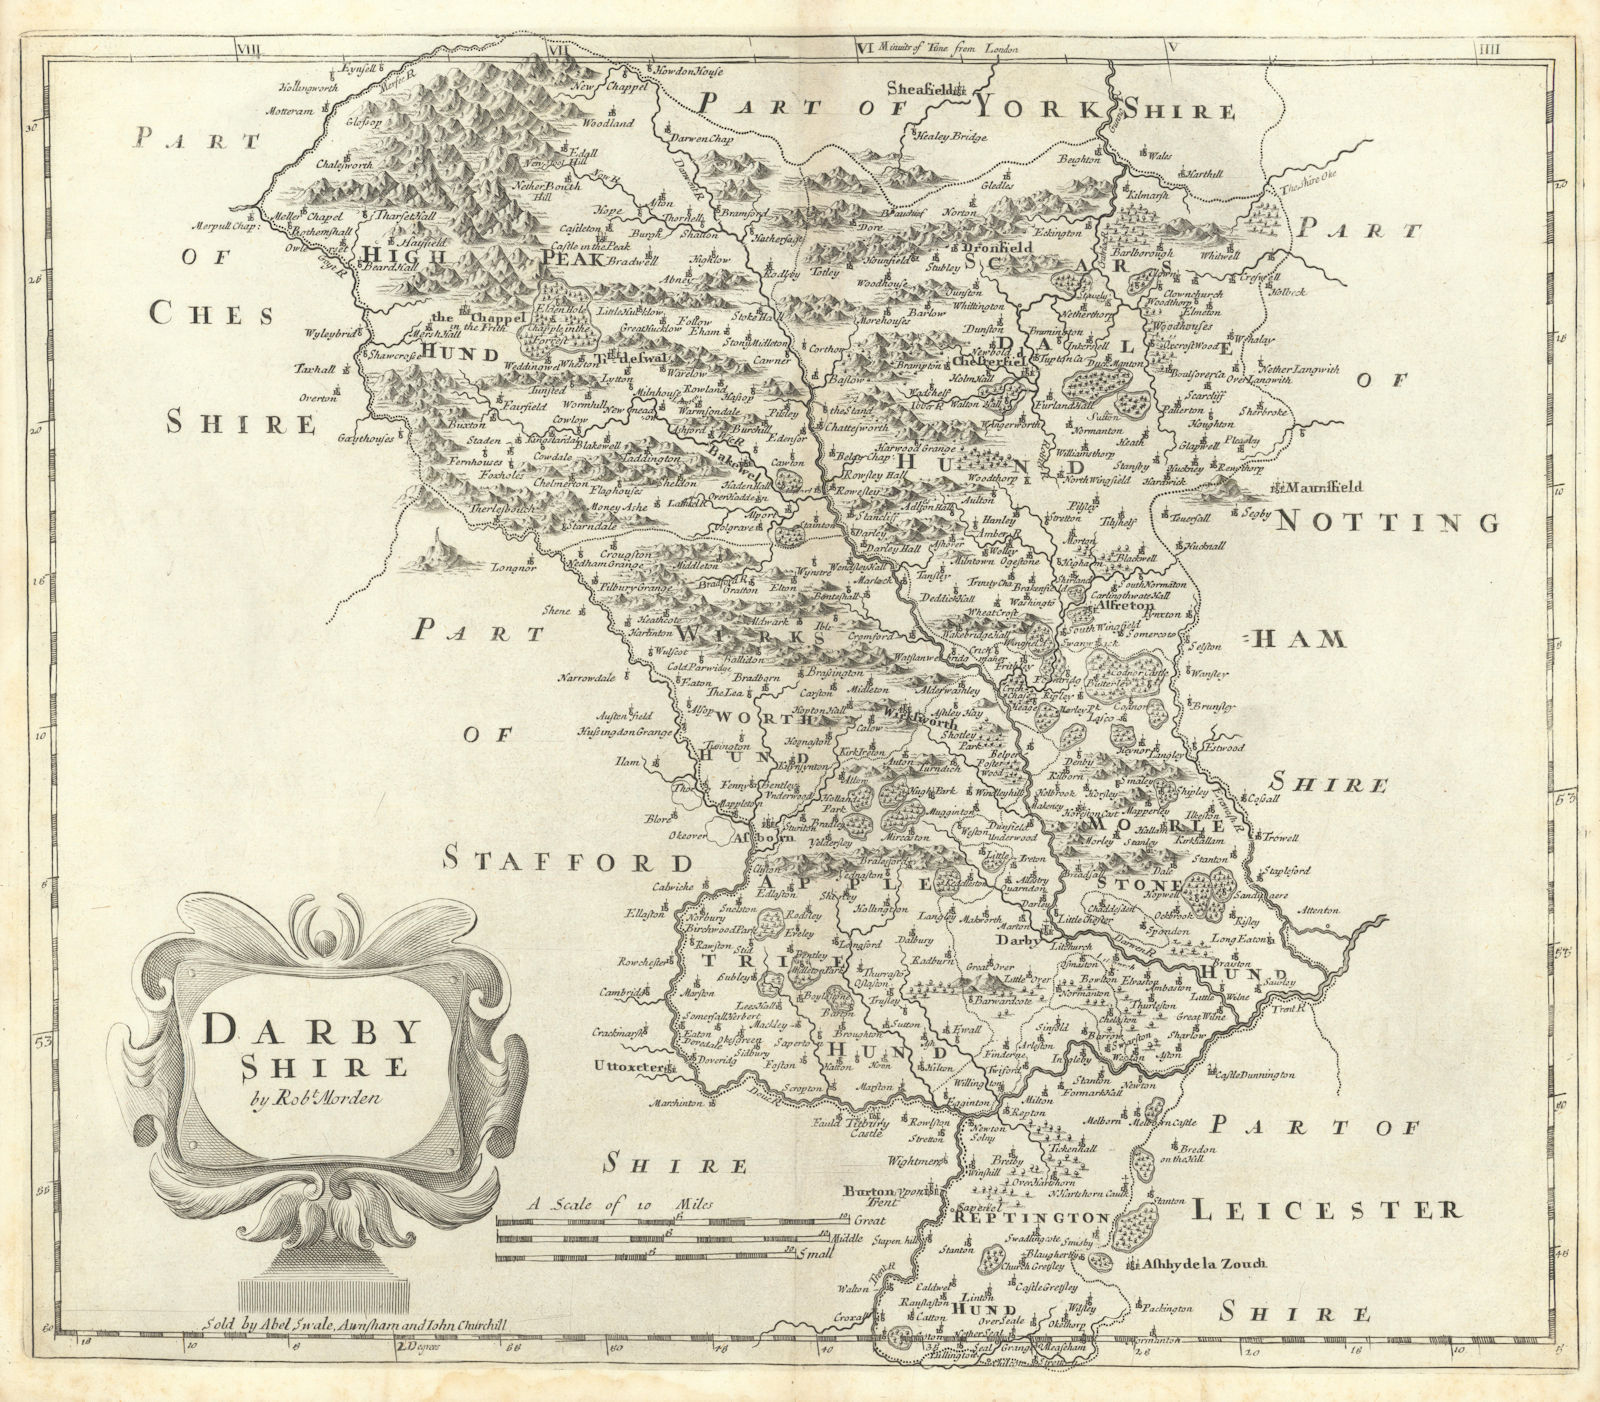 Associate Product Derbyshire. 'DARBY SHIRE' by ROBERT MORDEN. Shows Peak District 1722 old map